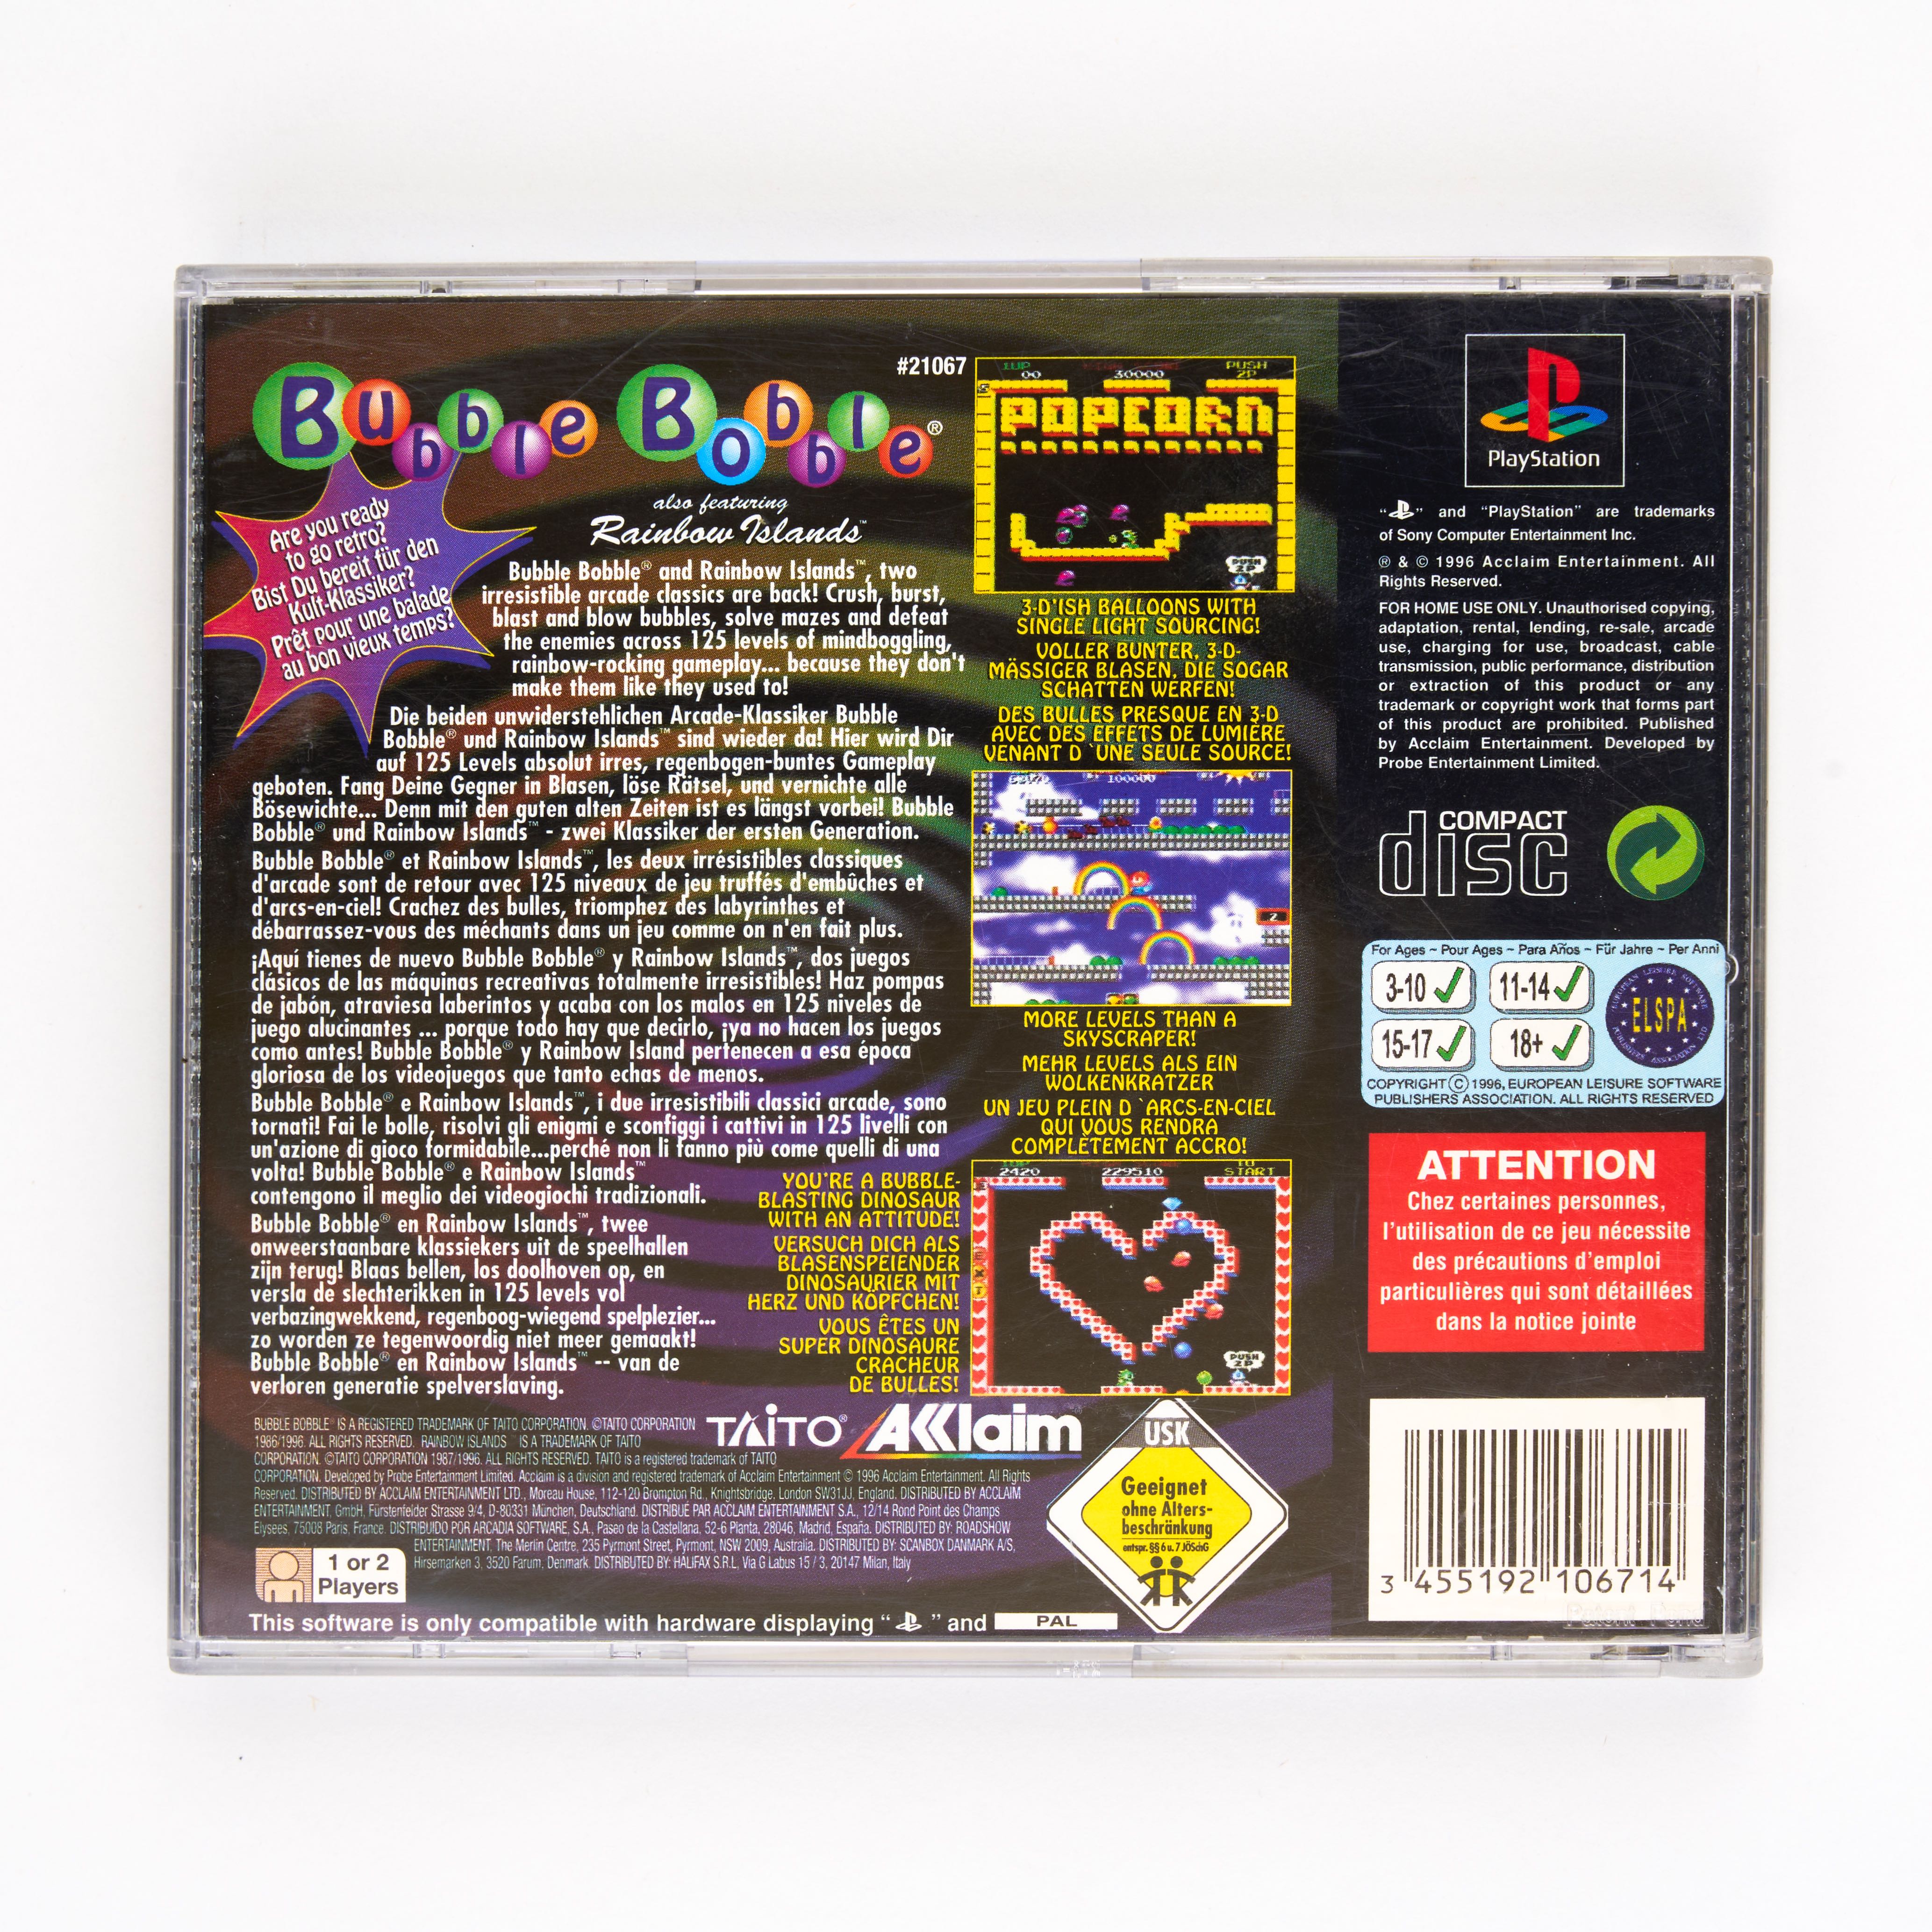 Sony - Bubble Bobble Featuring Rainbow Islands PAL - Playstation - Incomplete - Image 2 of 2